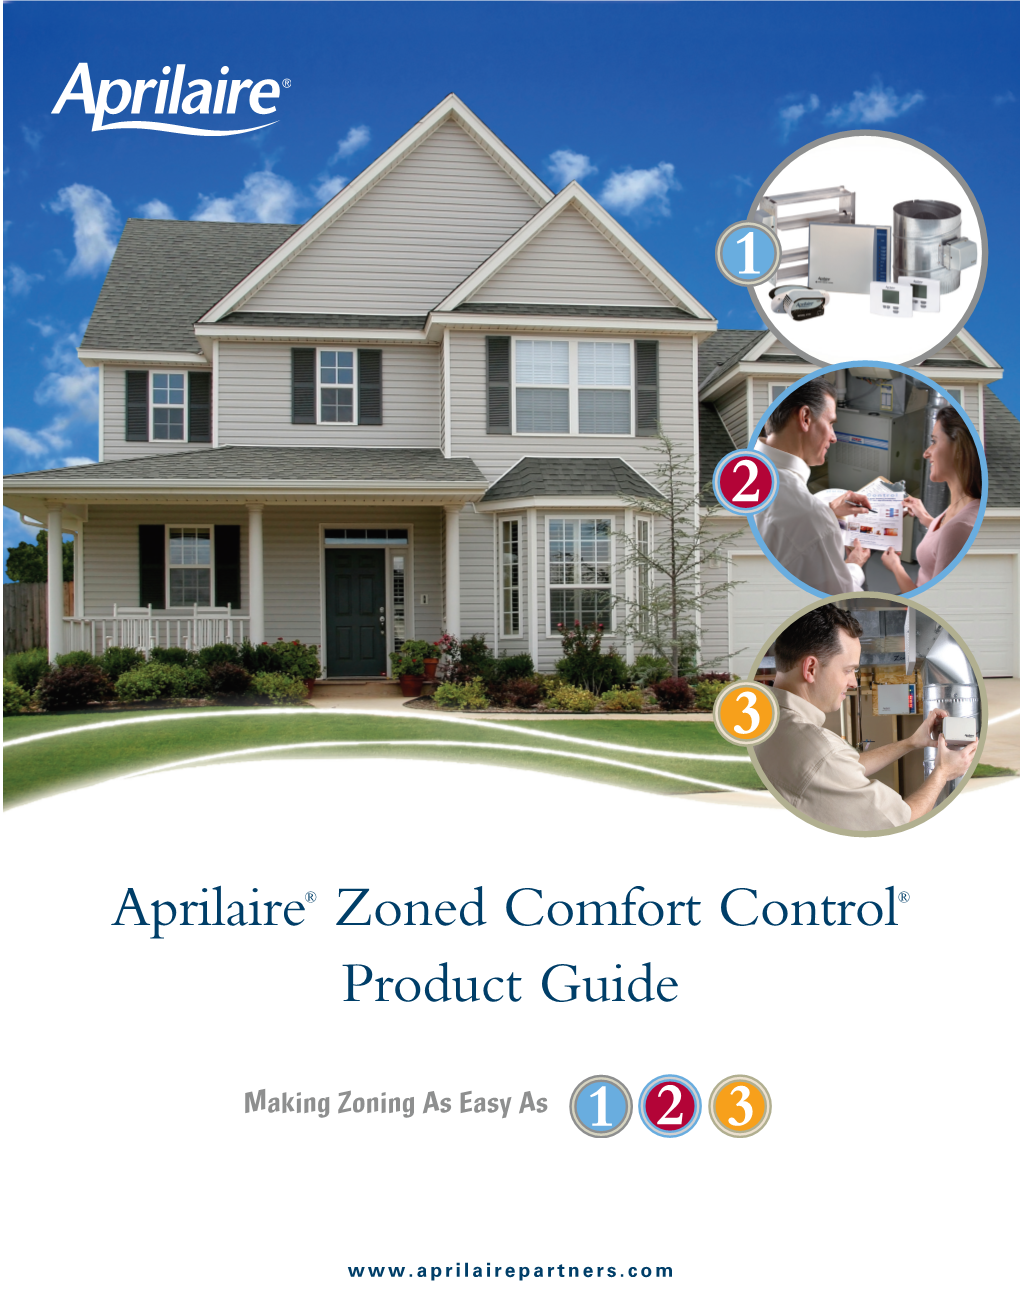 Aprilaire® Zoned Comfort Control® Product Guide